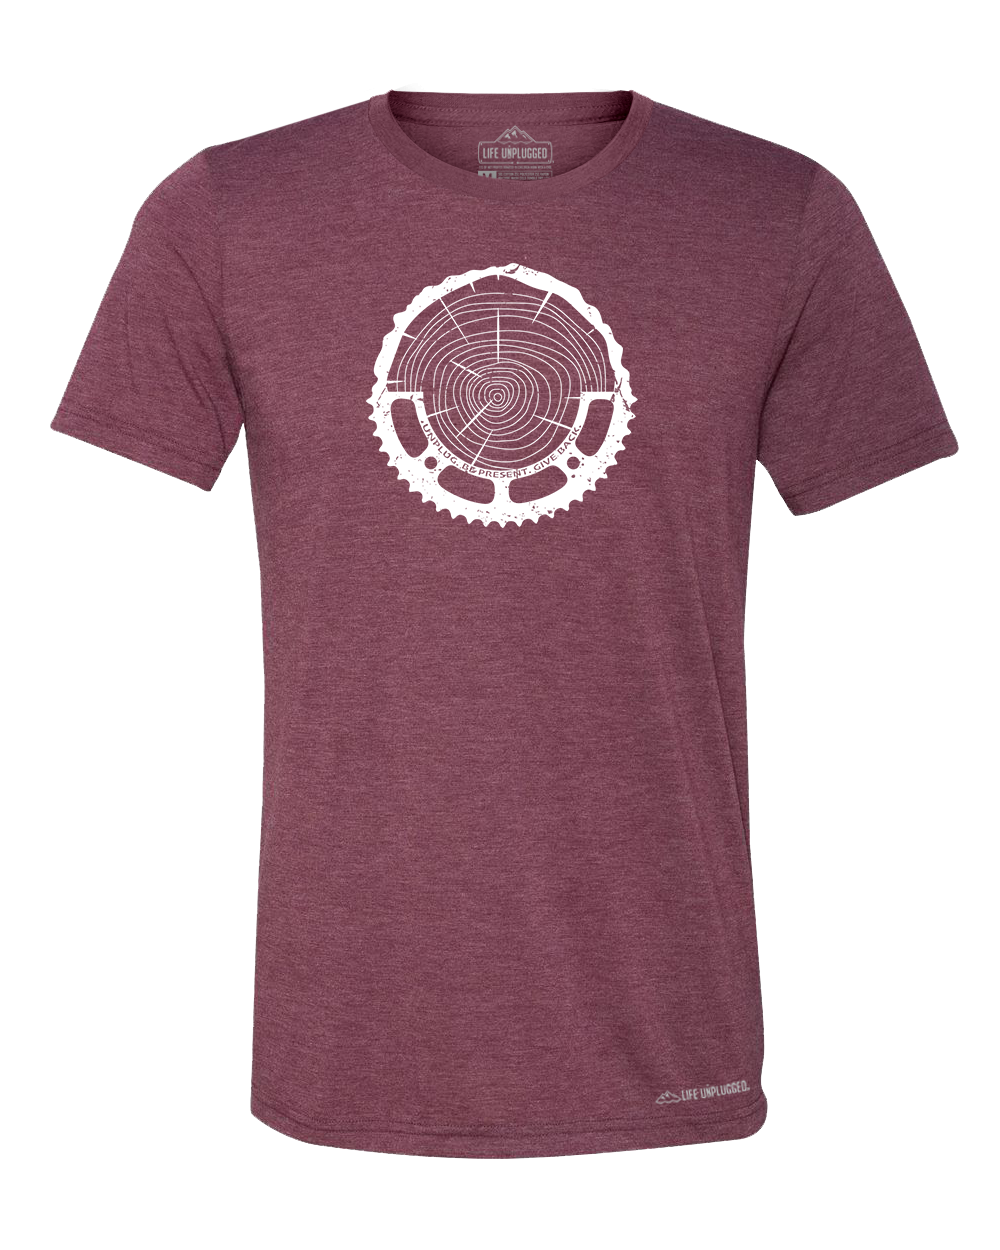 Tree Rings Chainring Premium Triblend T-Shirt - Life Unplugged